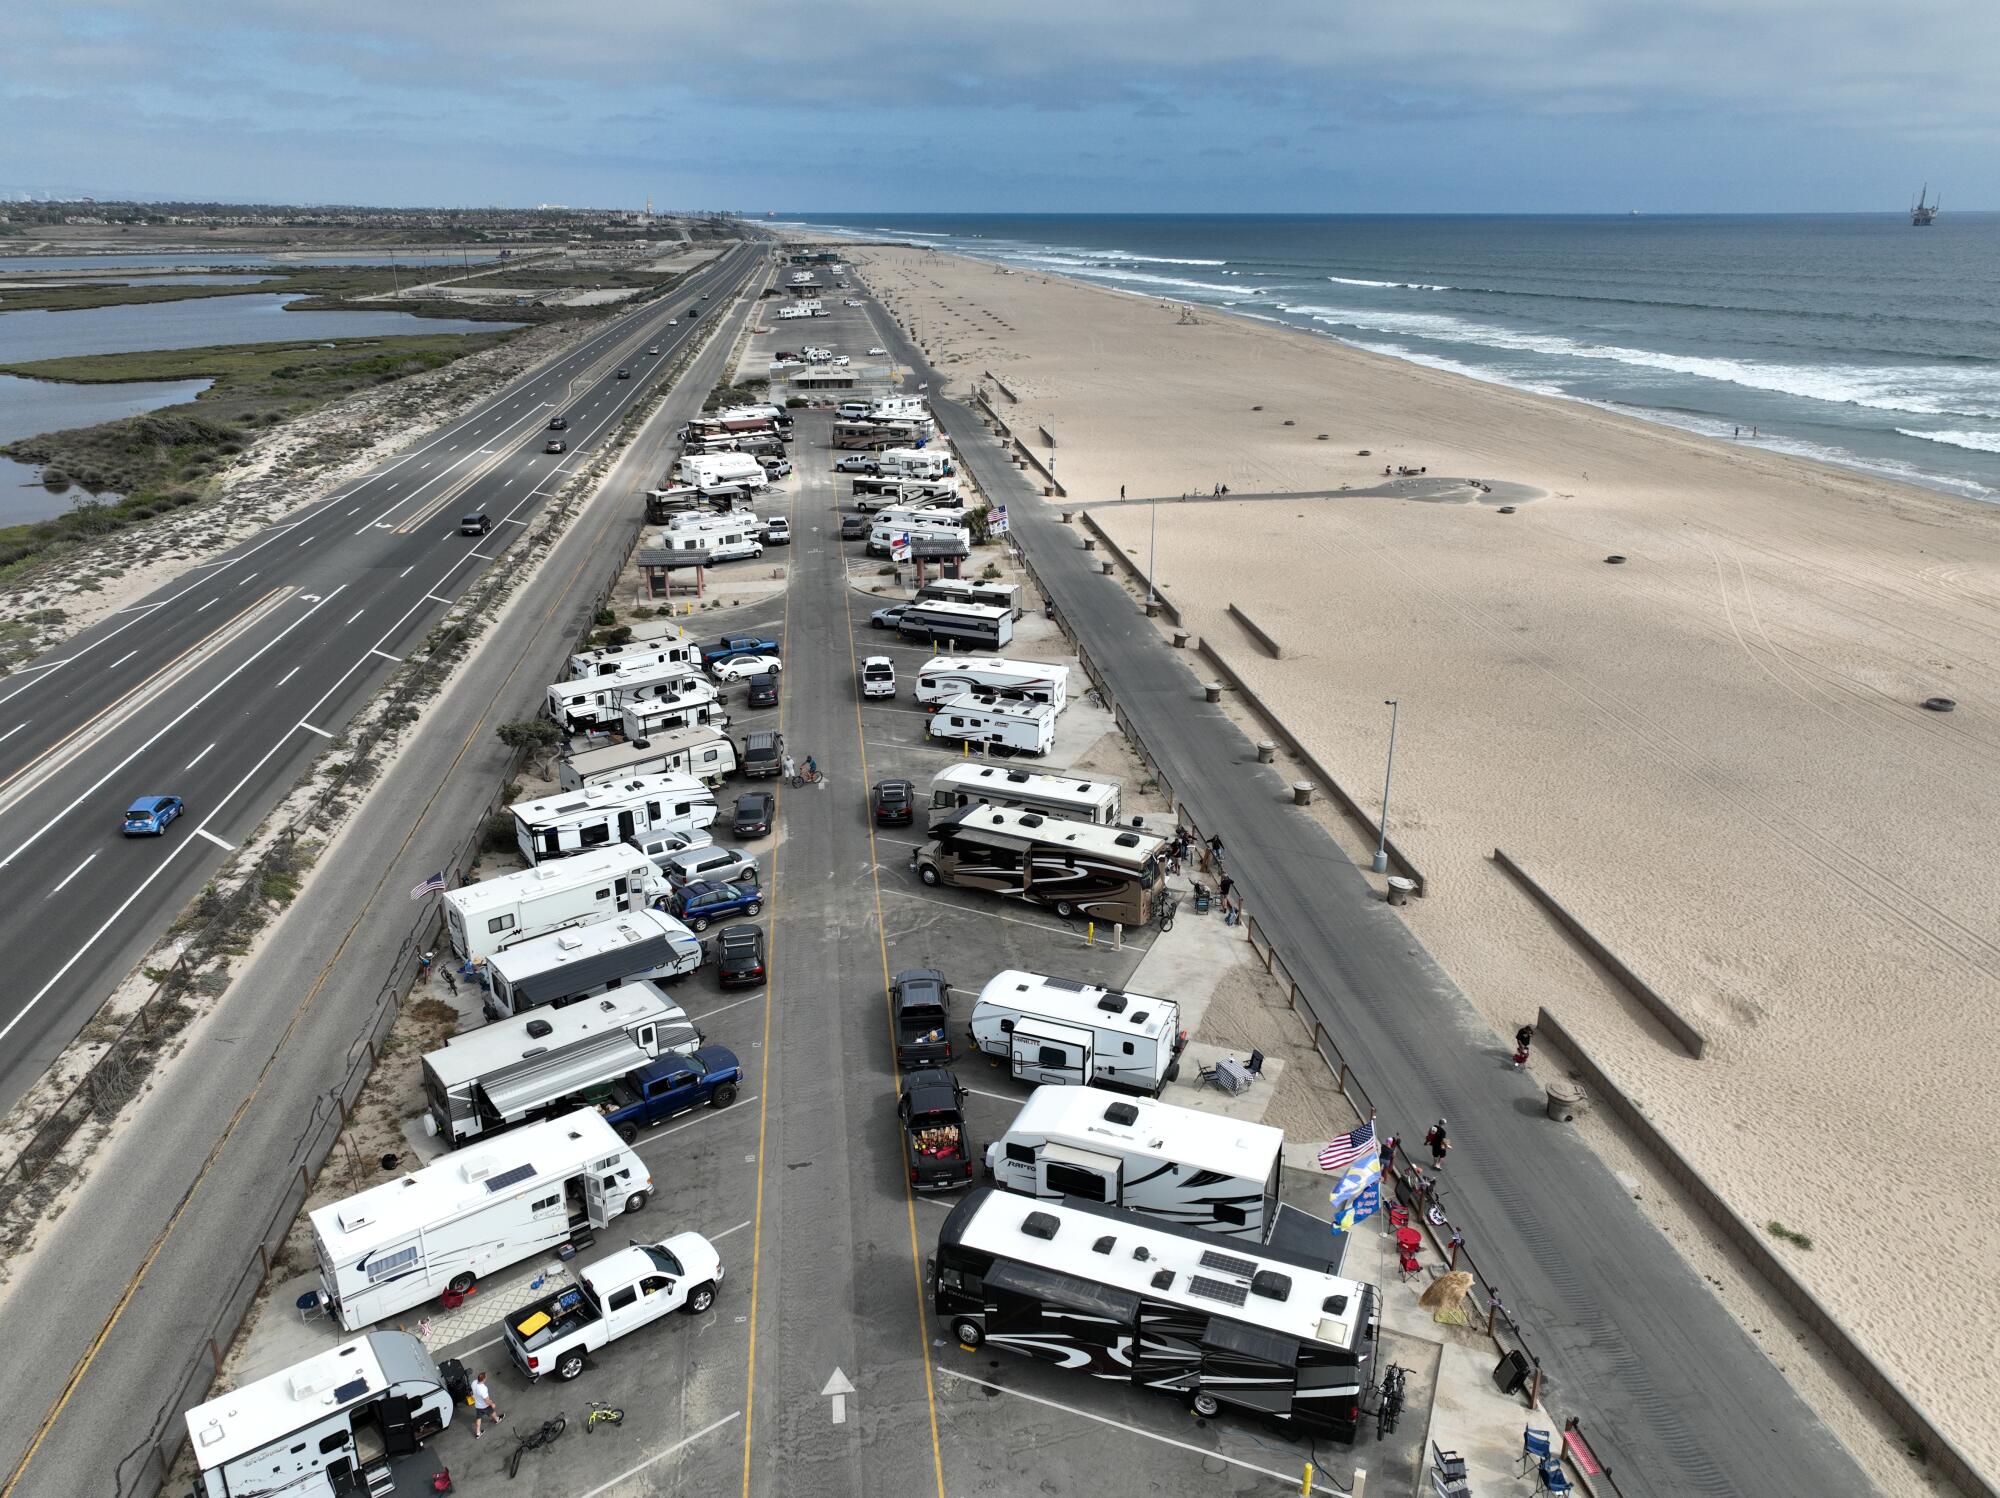 An aerial view of campers arriving and setting up during the Memorial Day weekend at Bolsa Chica State Beach campground